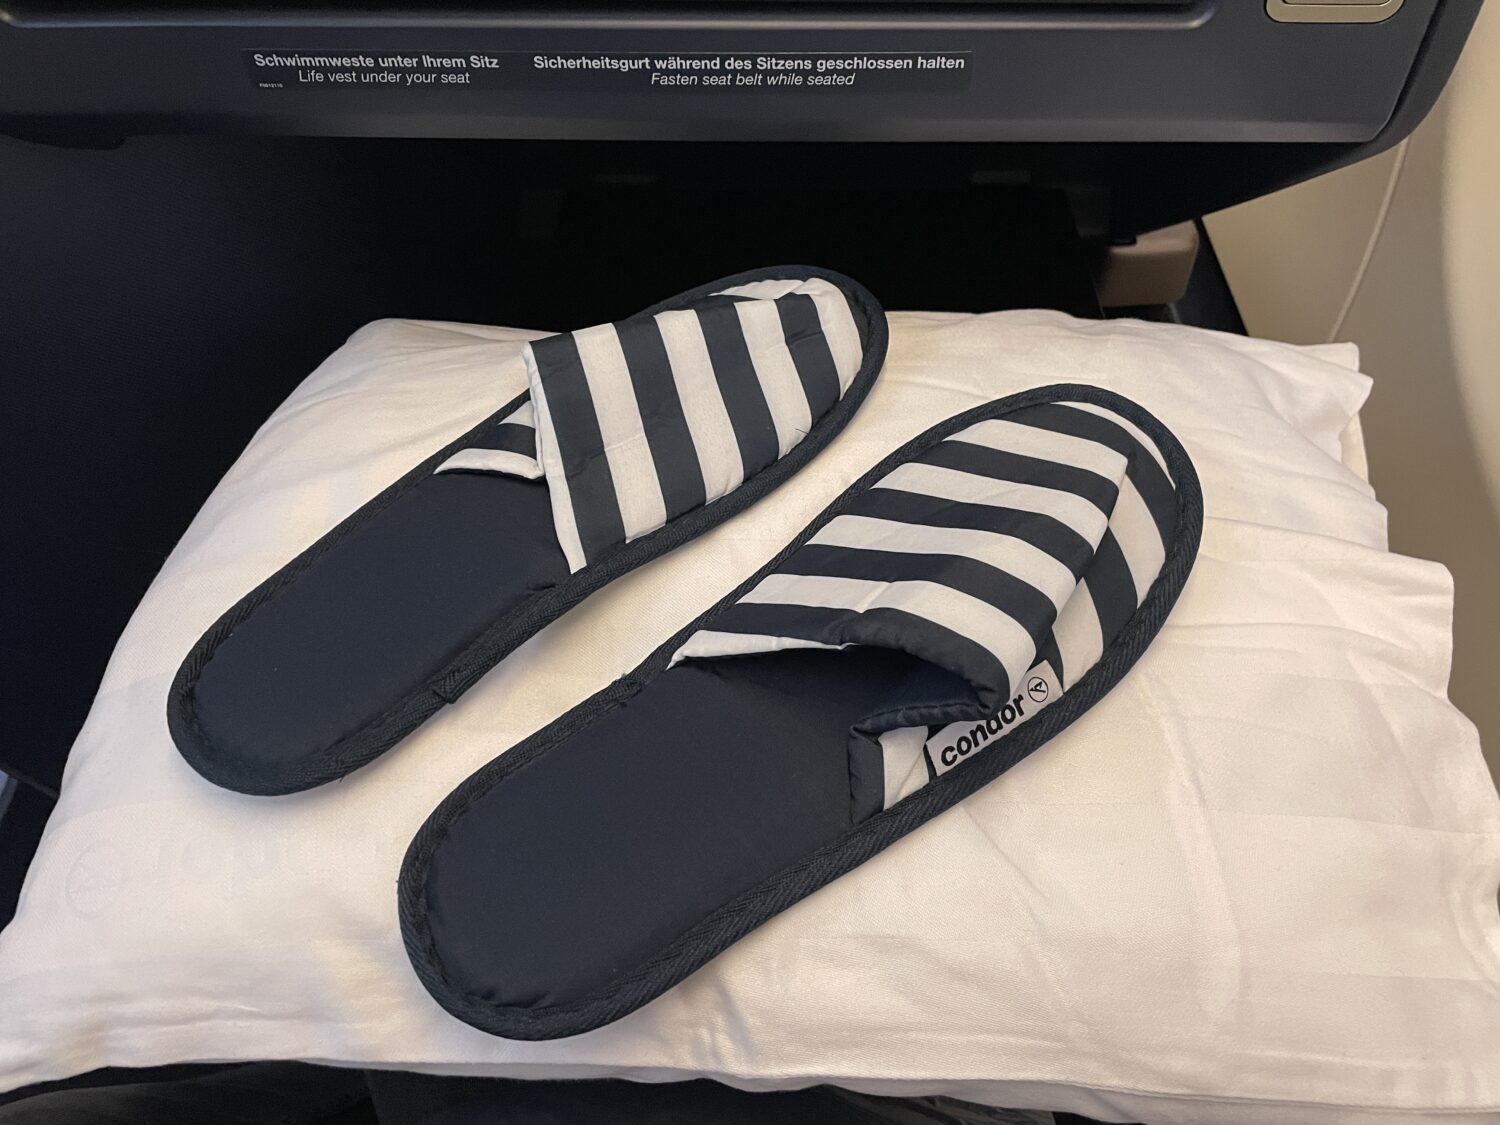 Condor Airlines Slippers Business Class